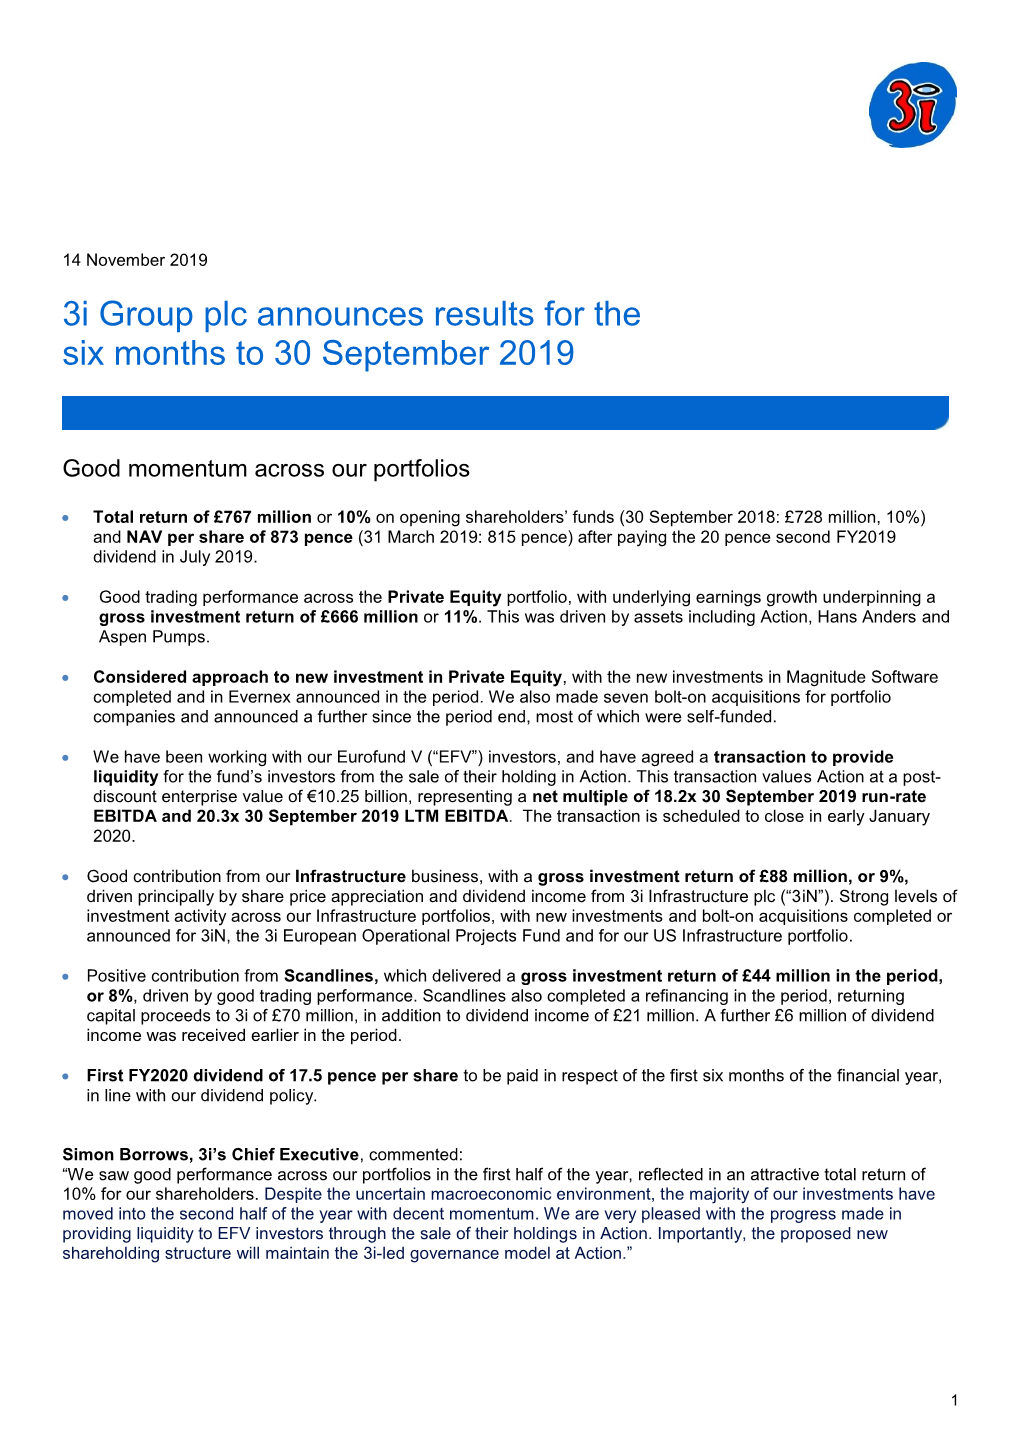 3I Group Plc Announces Results for the Six Months to 30 September 2019